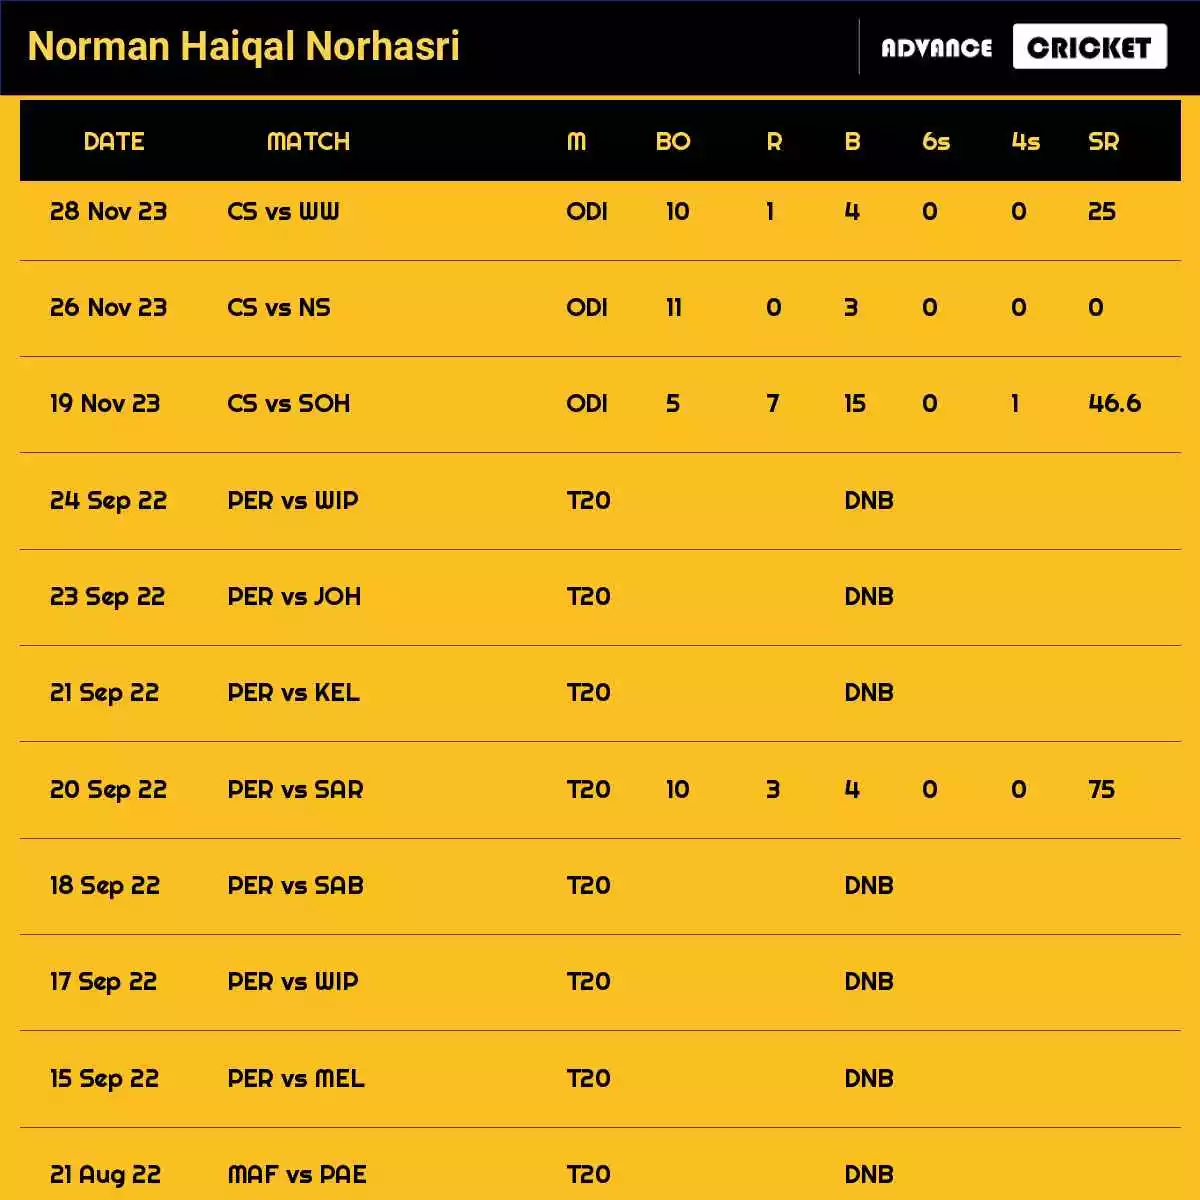 Norman Haiqal Norhasri Recent Matches Details Date Wise